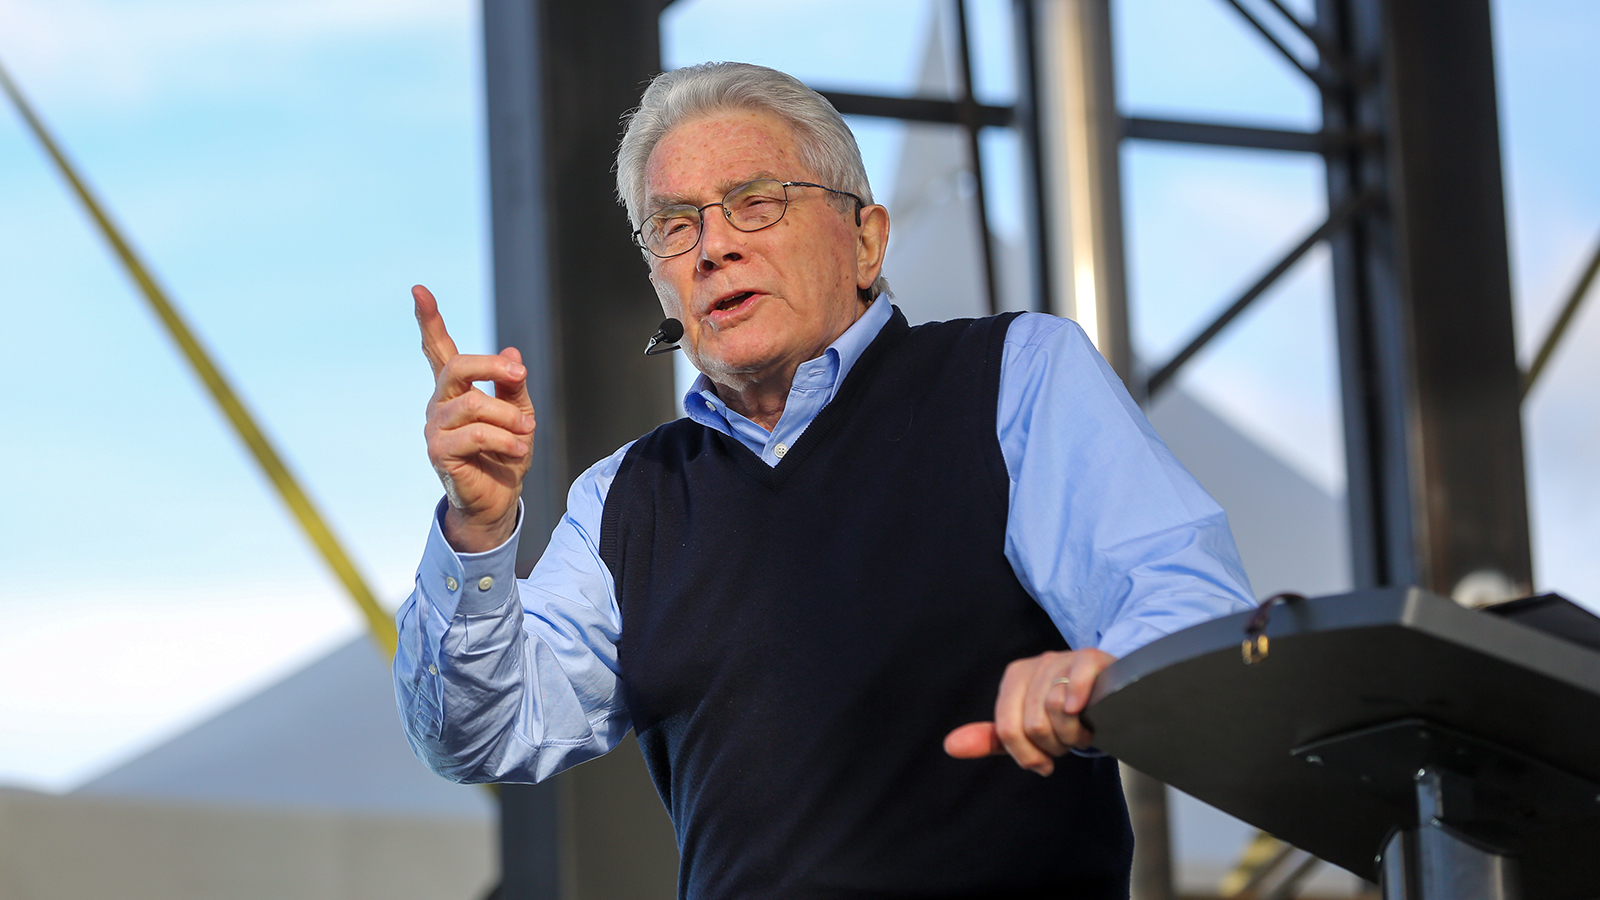 Luis Palau speaks in Alaska in June 2014. Photo by Brad Person, courtesy of the Luis Palau Association